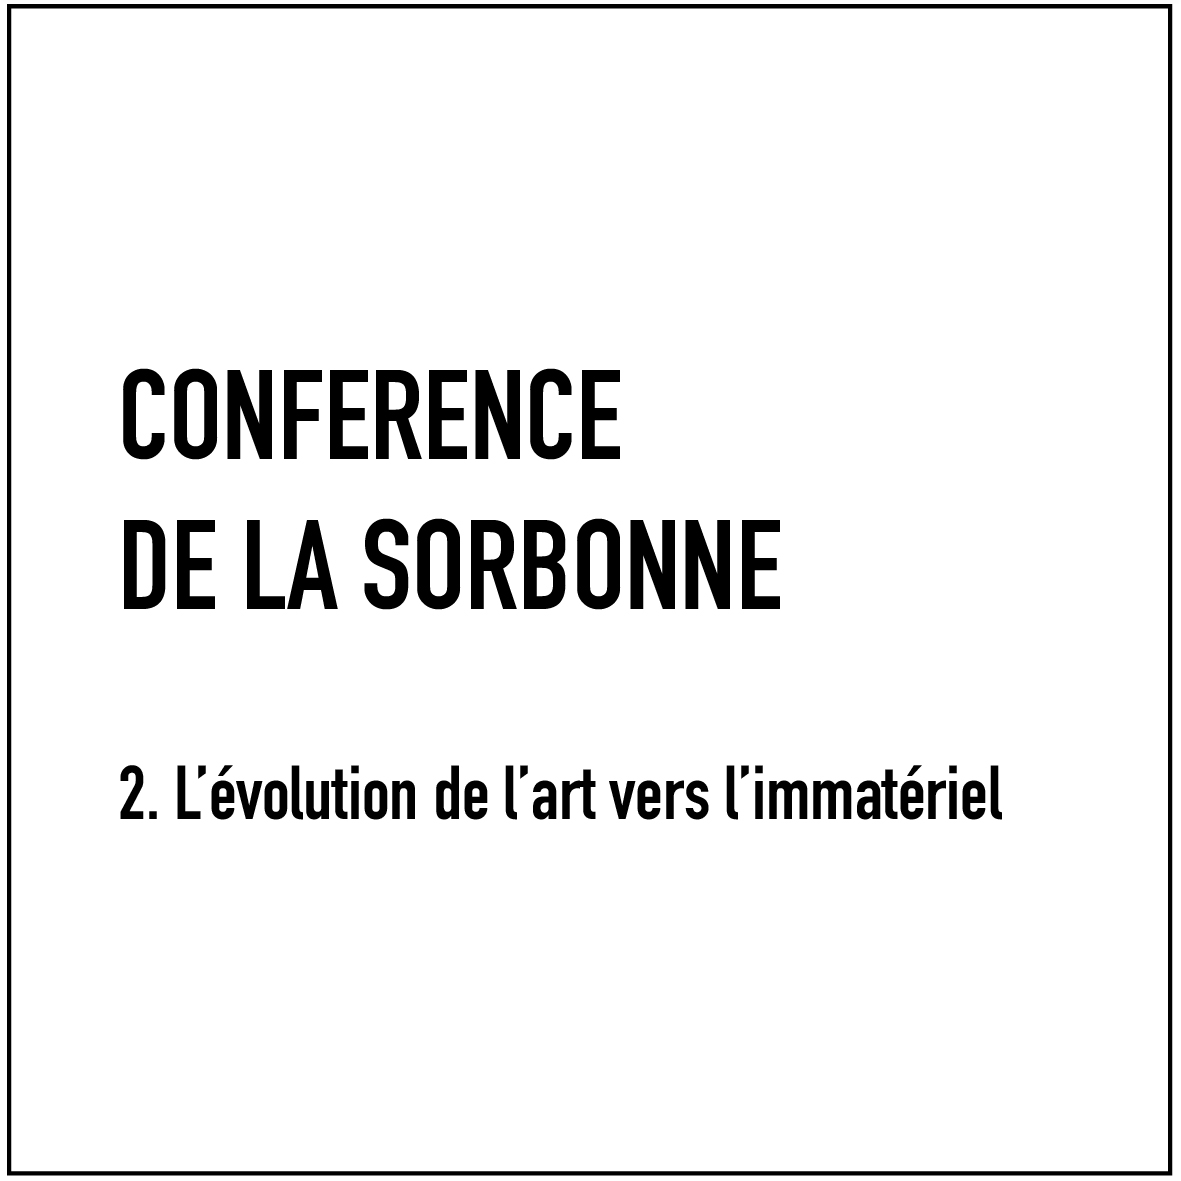 Lecture at the Sorbonne - 2. The evolution of art towards the immaterial